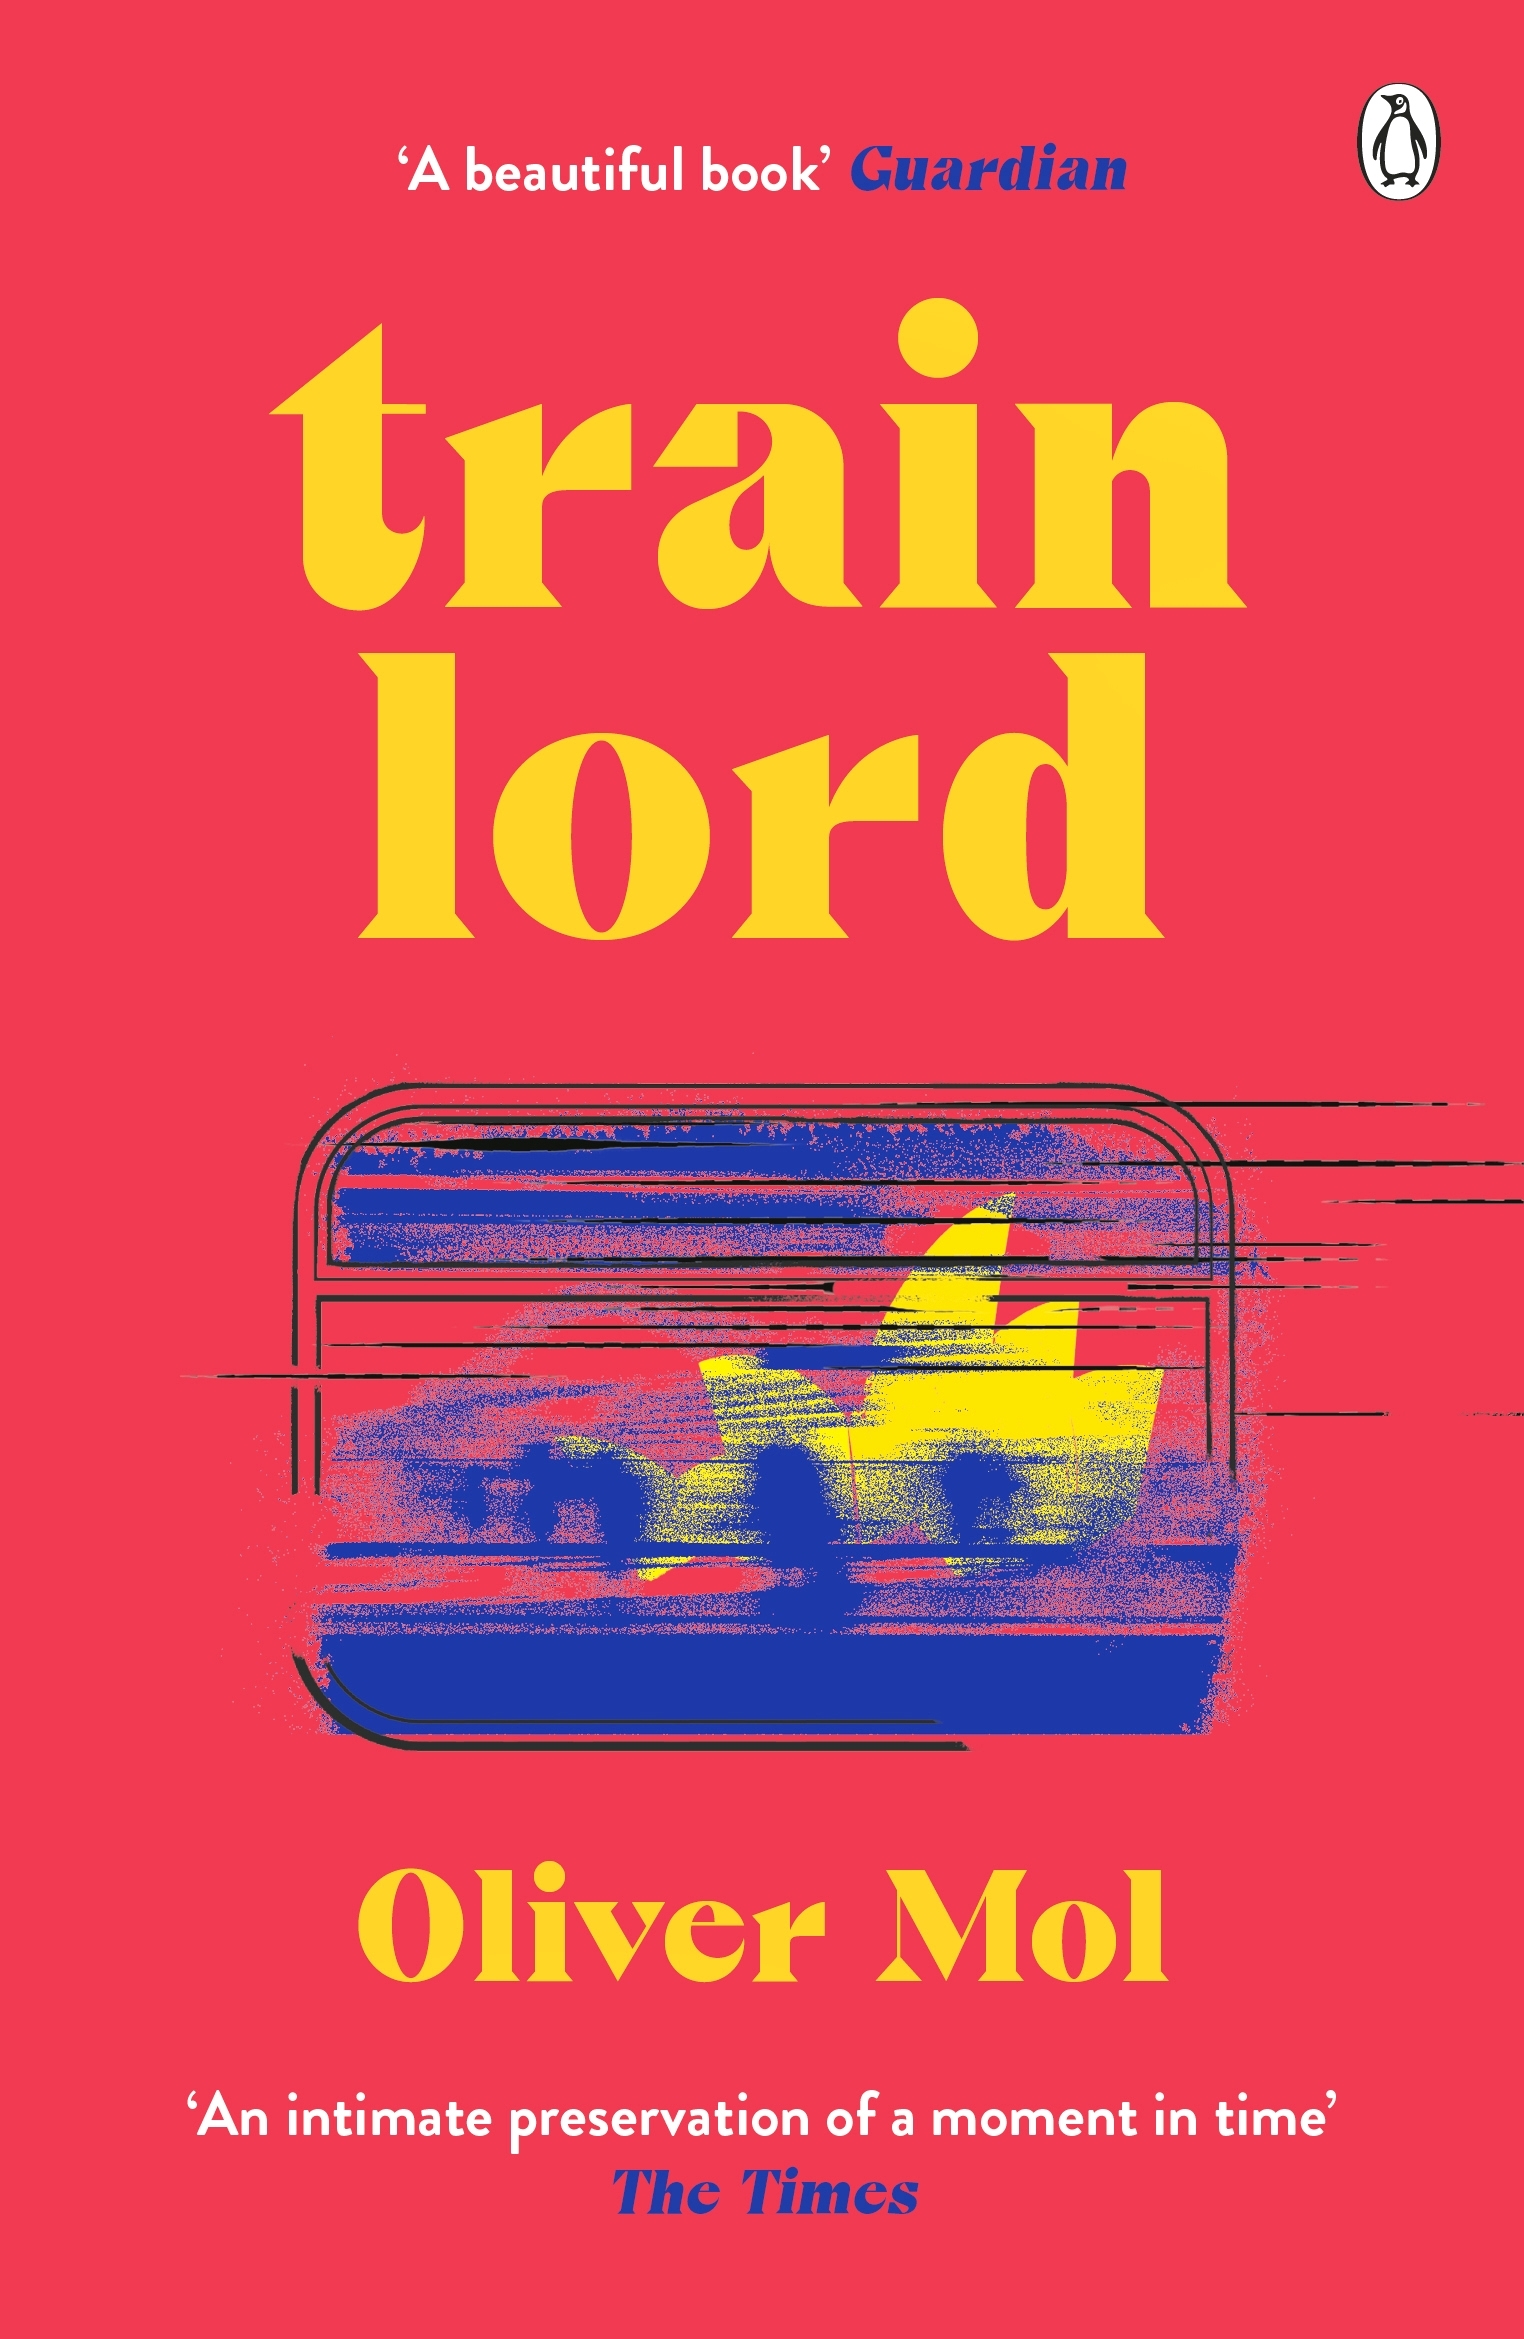 Train Lord by Oliver Mol